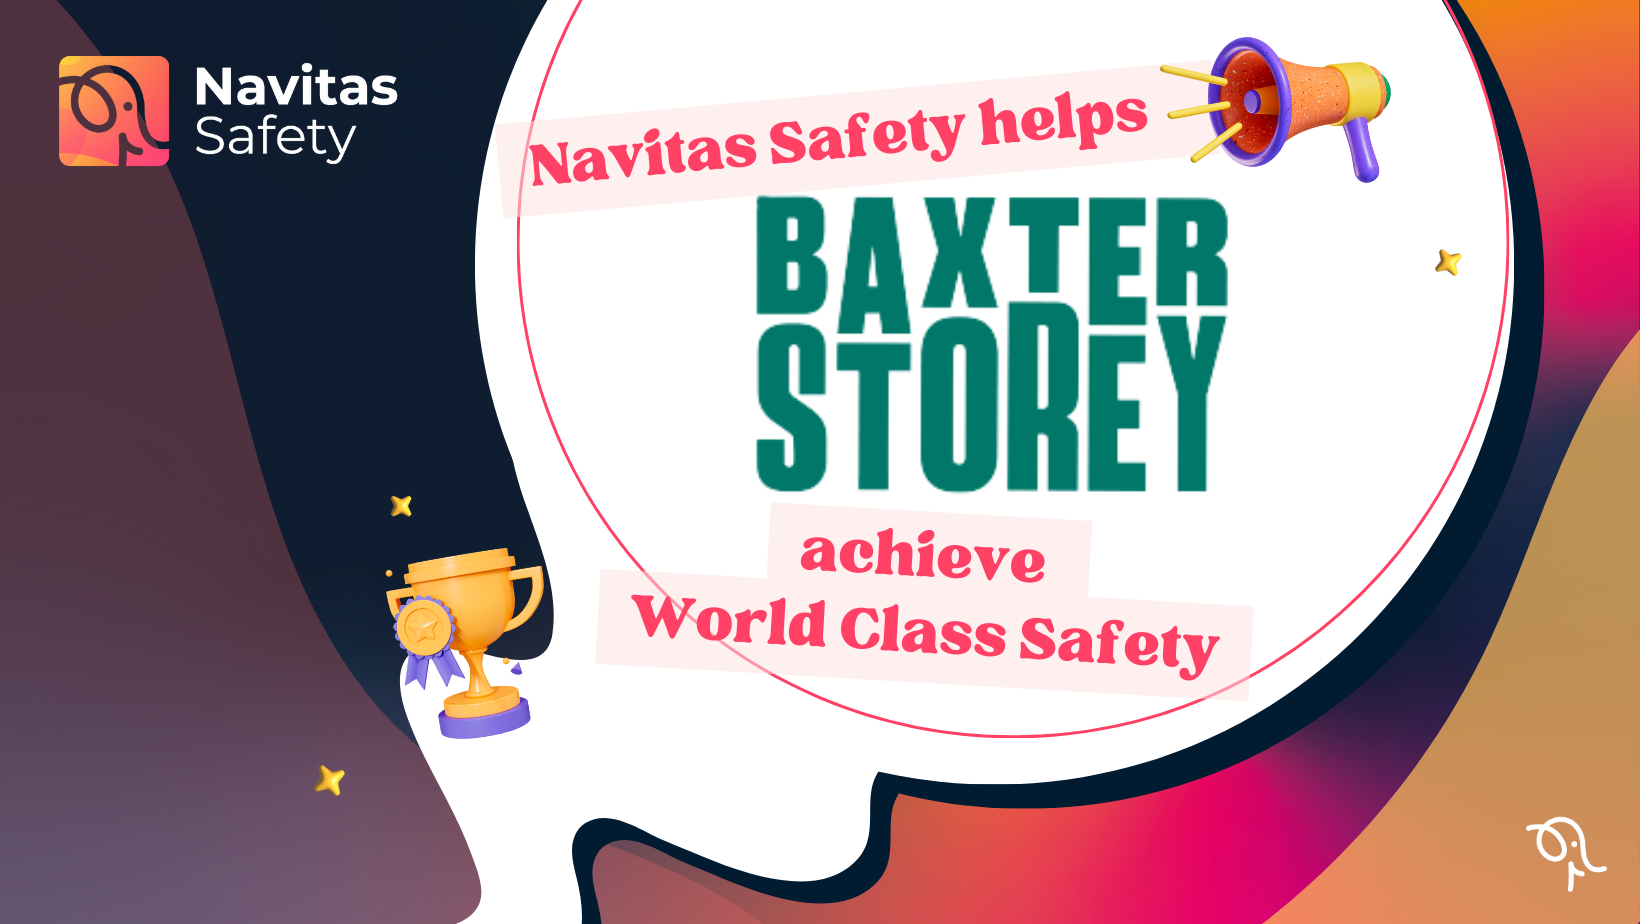 Speech bubble with megaphone next to the heading: "Navitas Safety helps BaxterStorey achieve world class safety"